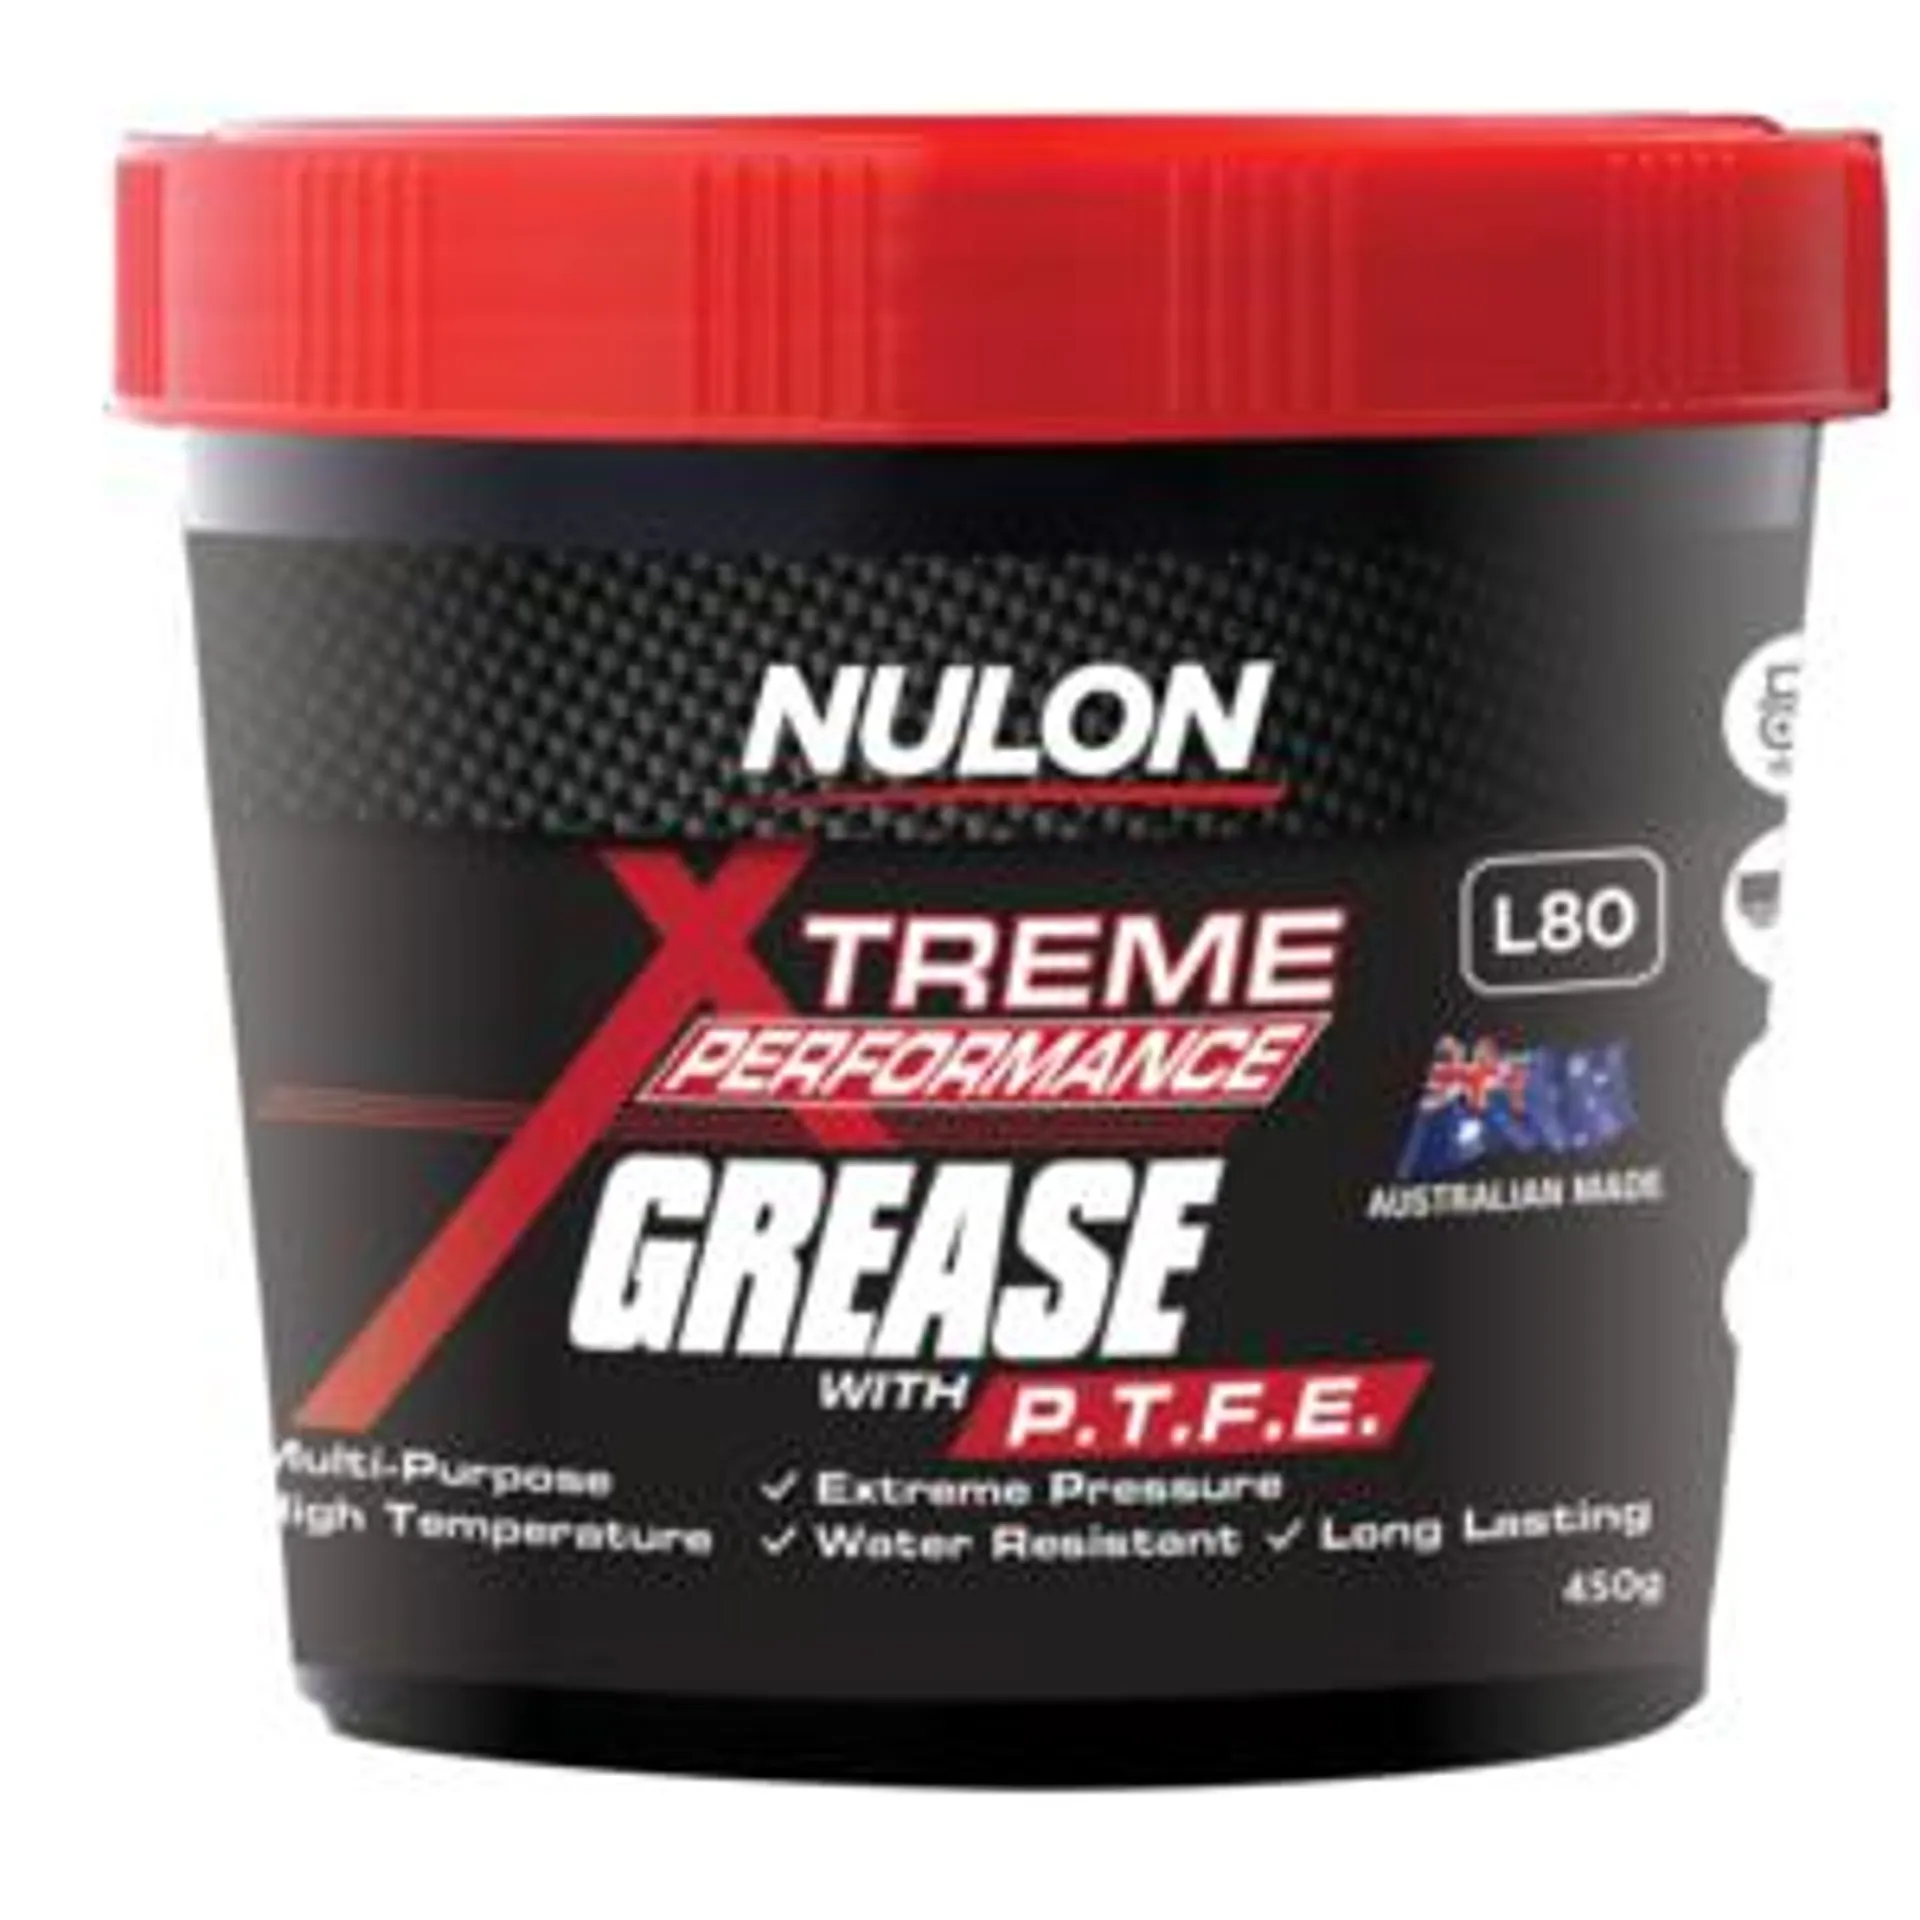 Nulon Xtreme Performance L80 Grease Tub with PTFE 450g - L80-T